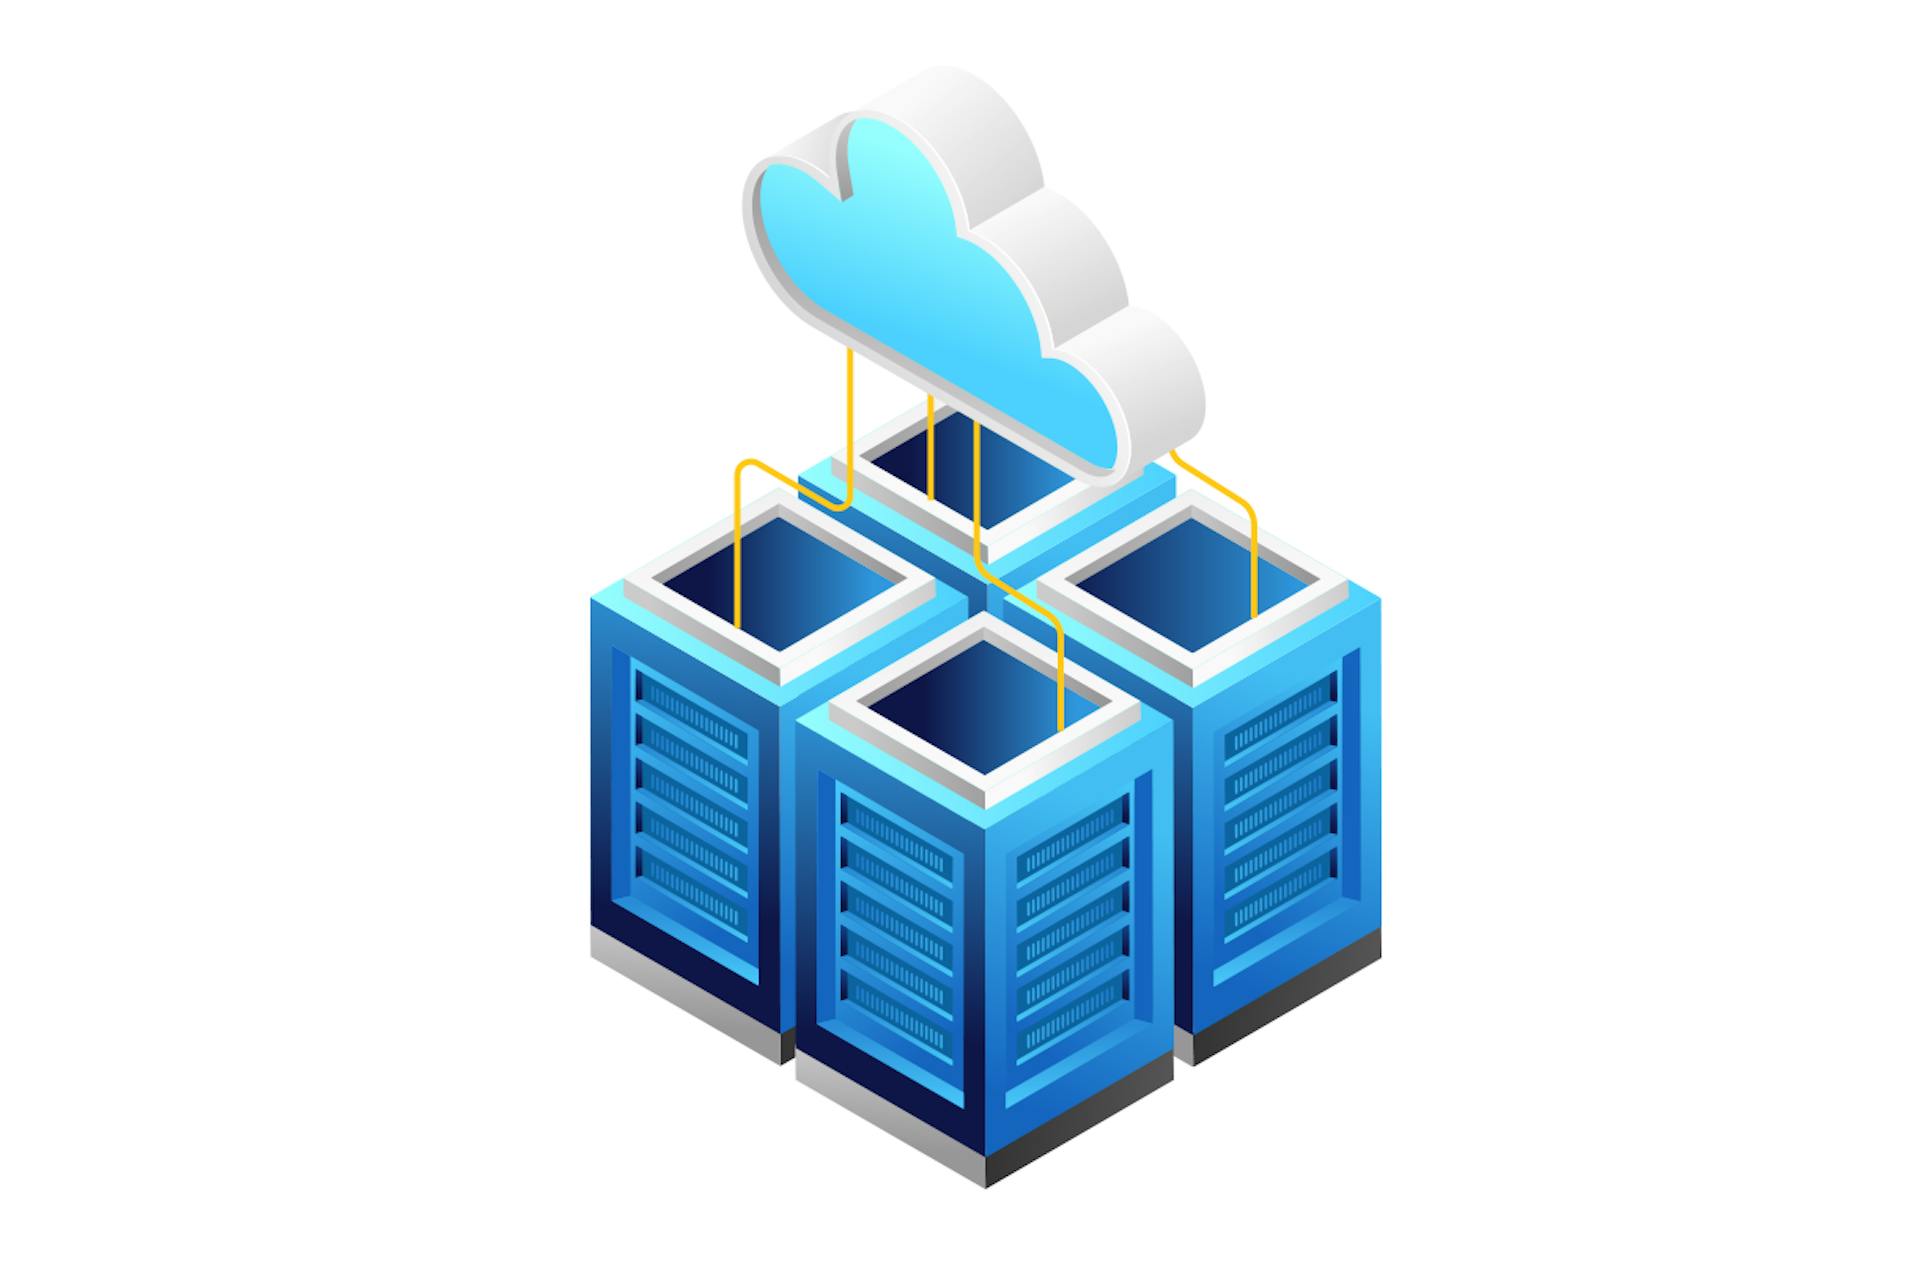 Image for a blog post about data lakes vs data warehouses, showing four blue storage containers linked by a cloud